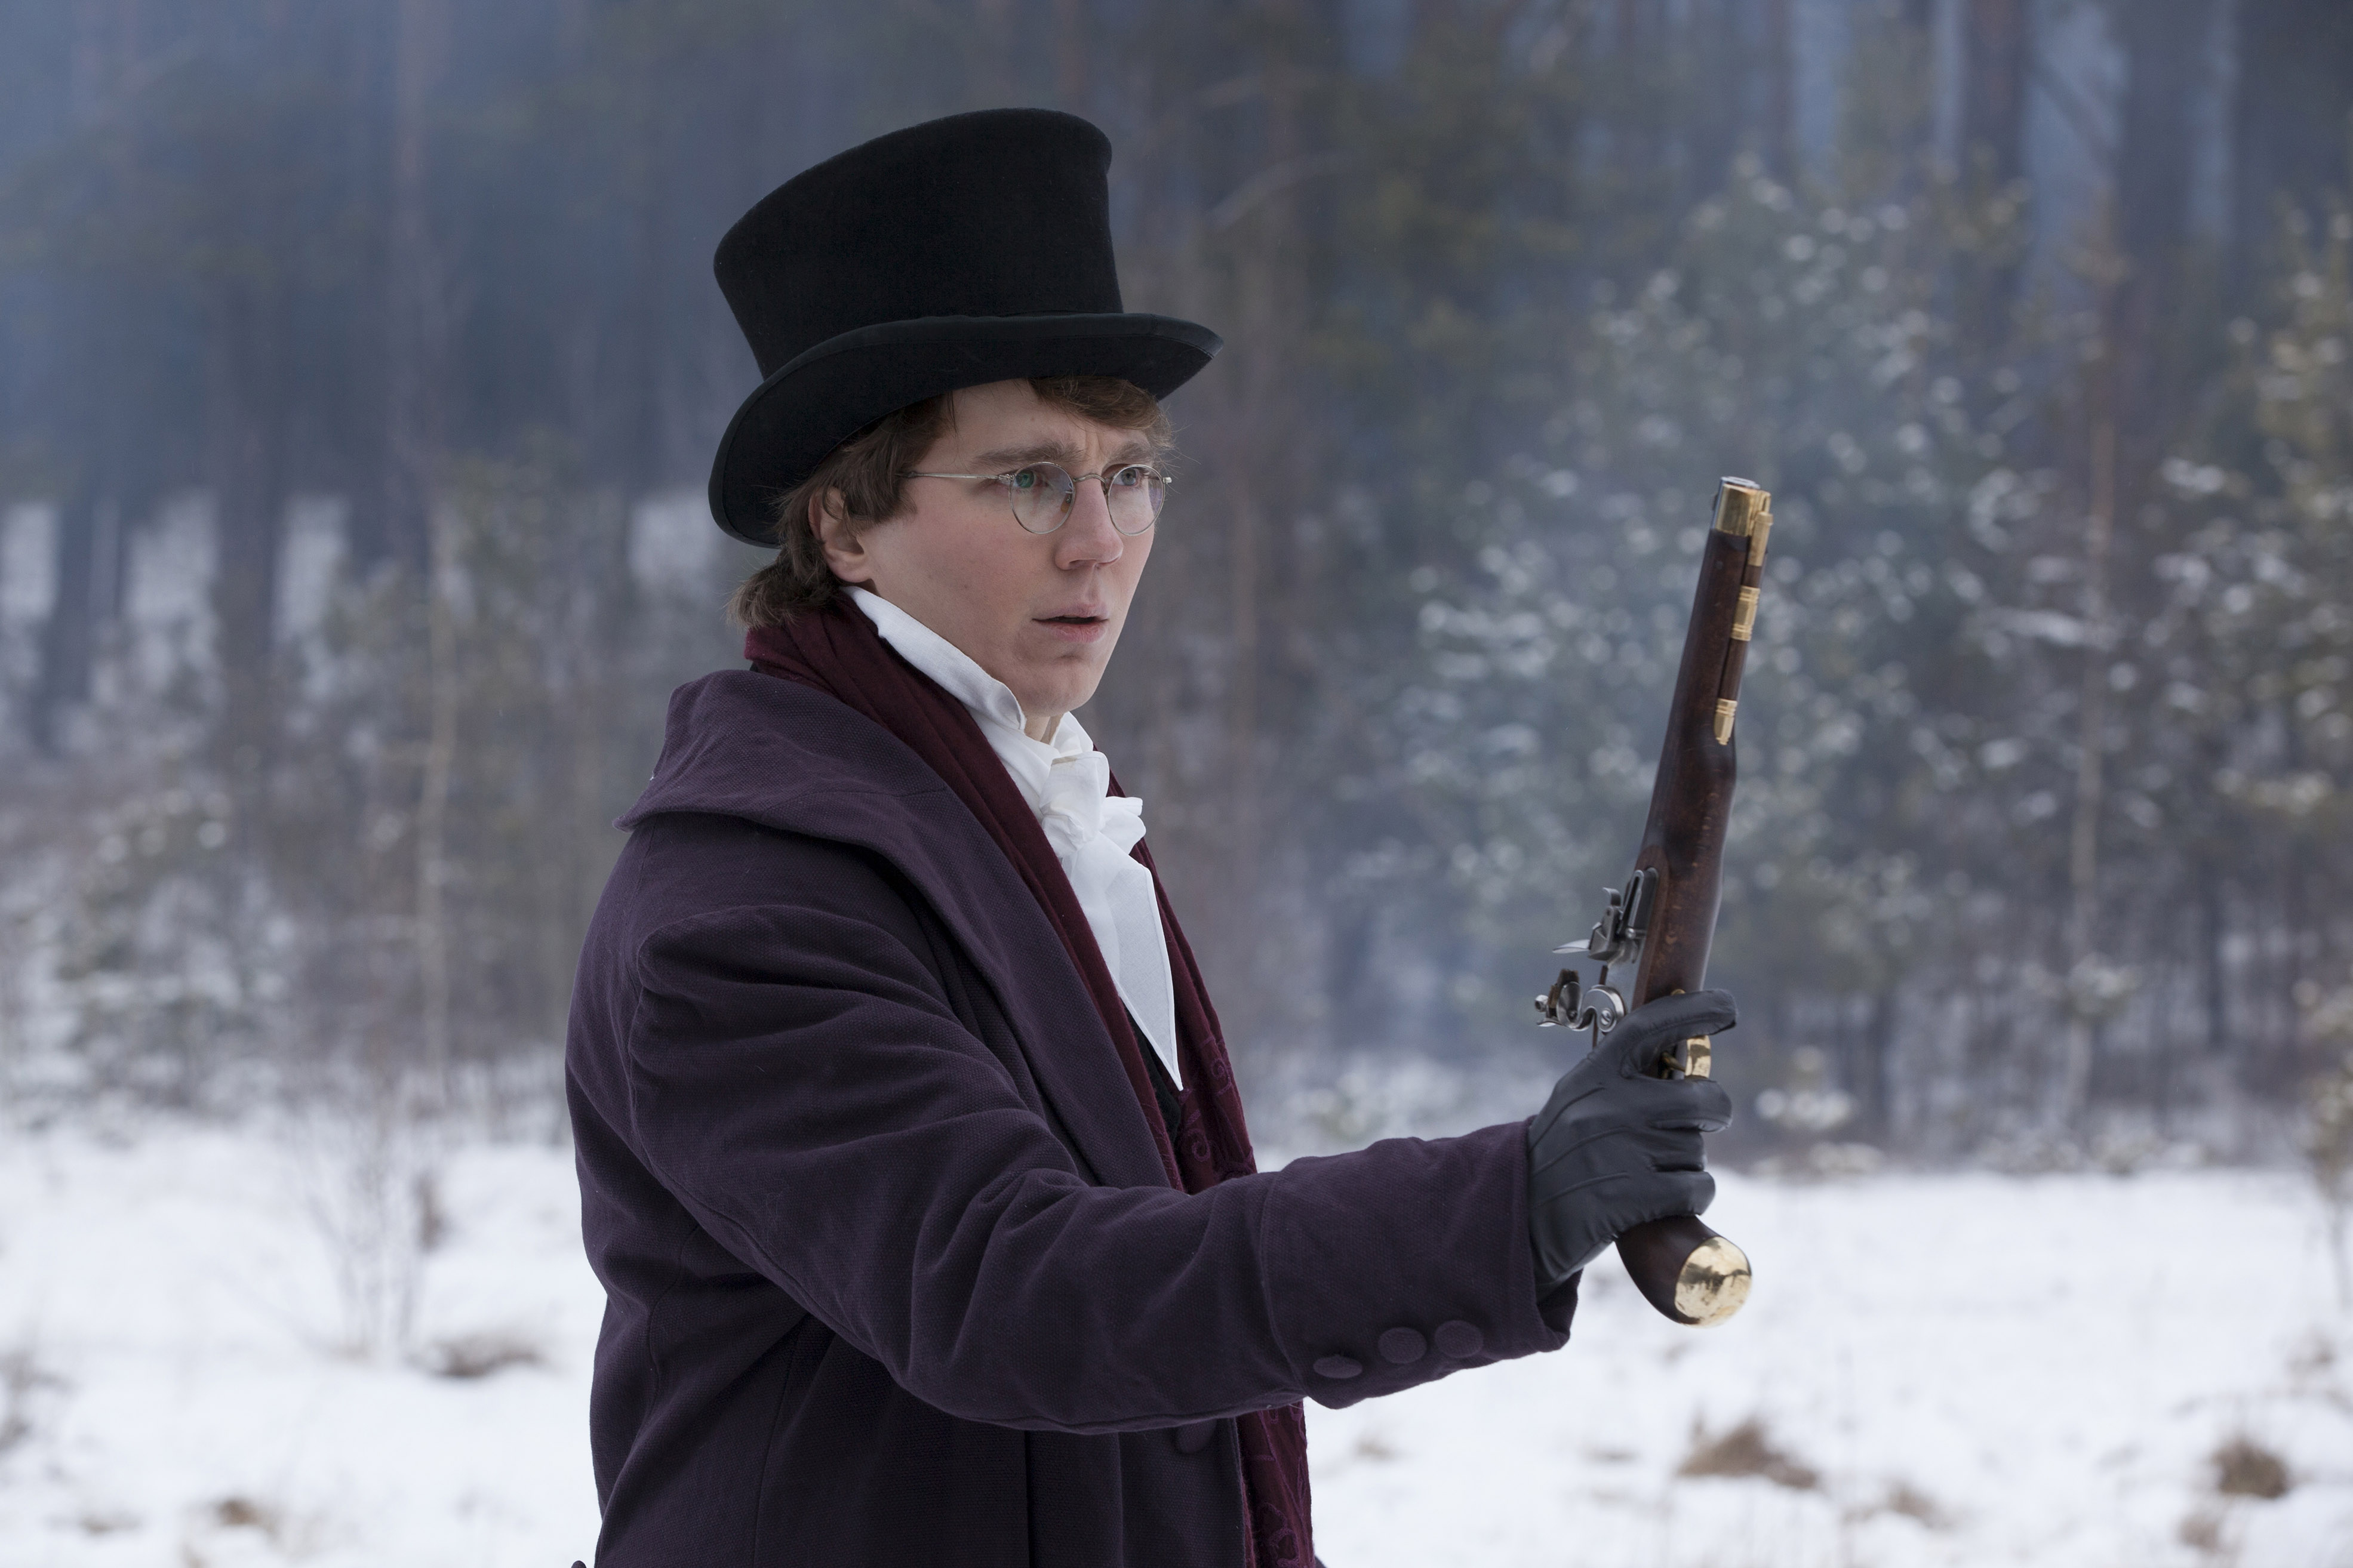 Paul Dano in War and Peace. (Laurie Spraham—BBC)